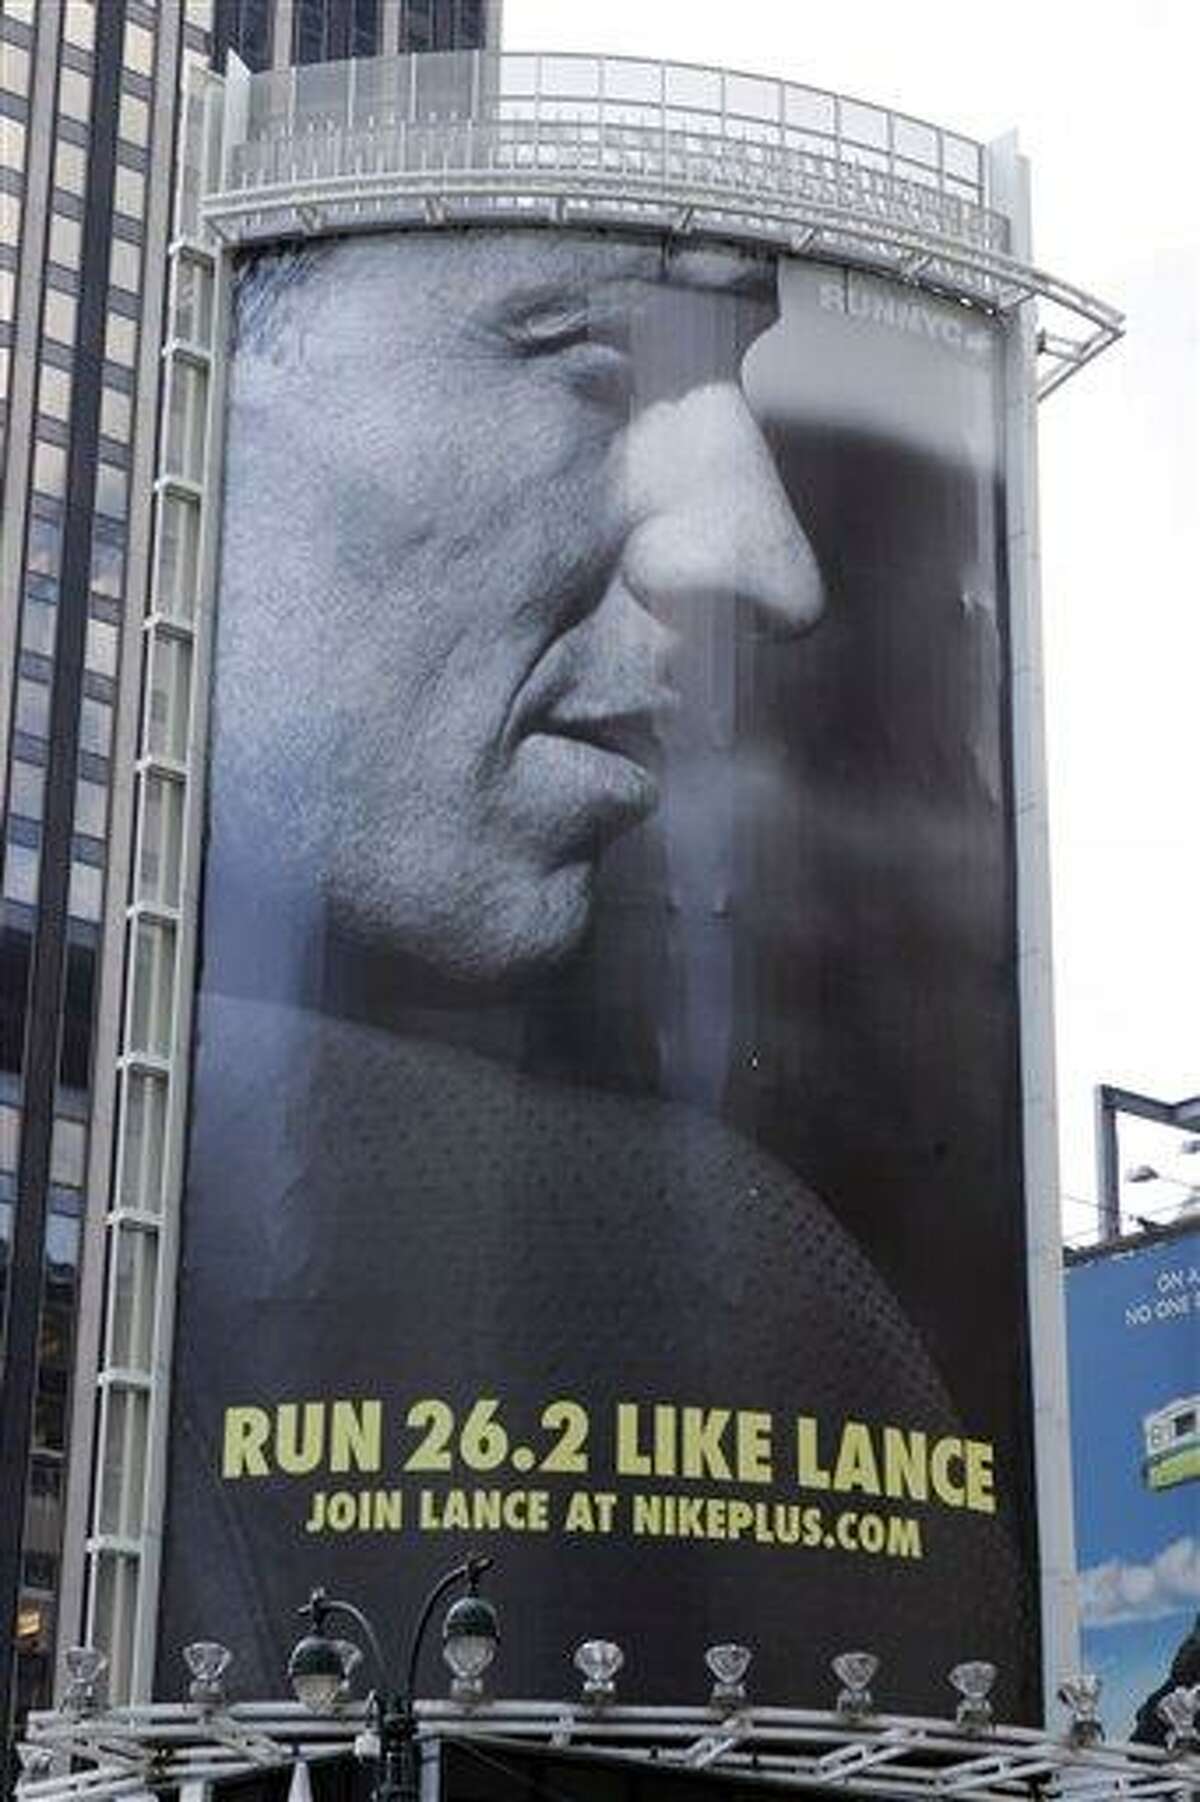 In an 80-foot billboard at 34th Street and 7th Avenue in Manhattan, Lance Armstrong and Nike challenge New Yorkers to "Run Like Lance" in a 2006 file photo. Nike said Wednesday that it is severing ties with Armstrong, citing insurmountable evidence that the cyclist participated in doping and misled the company for more than a decade. Associated Press